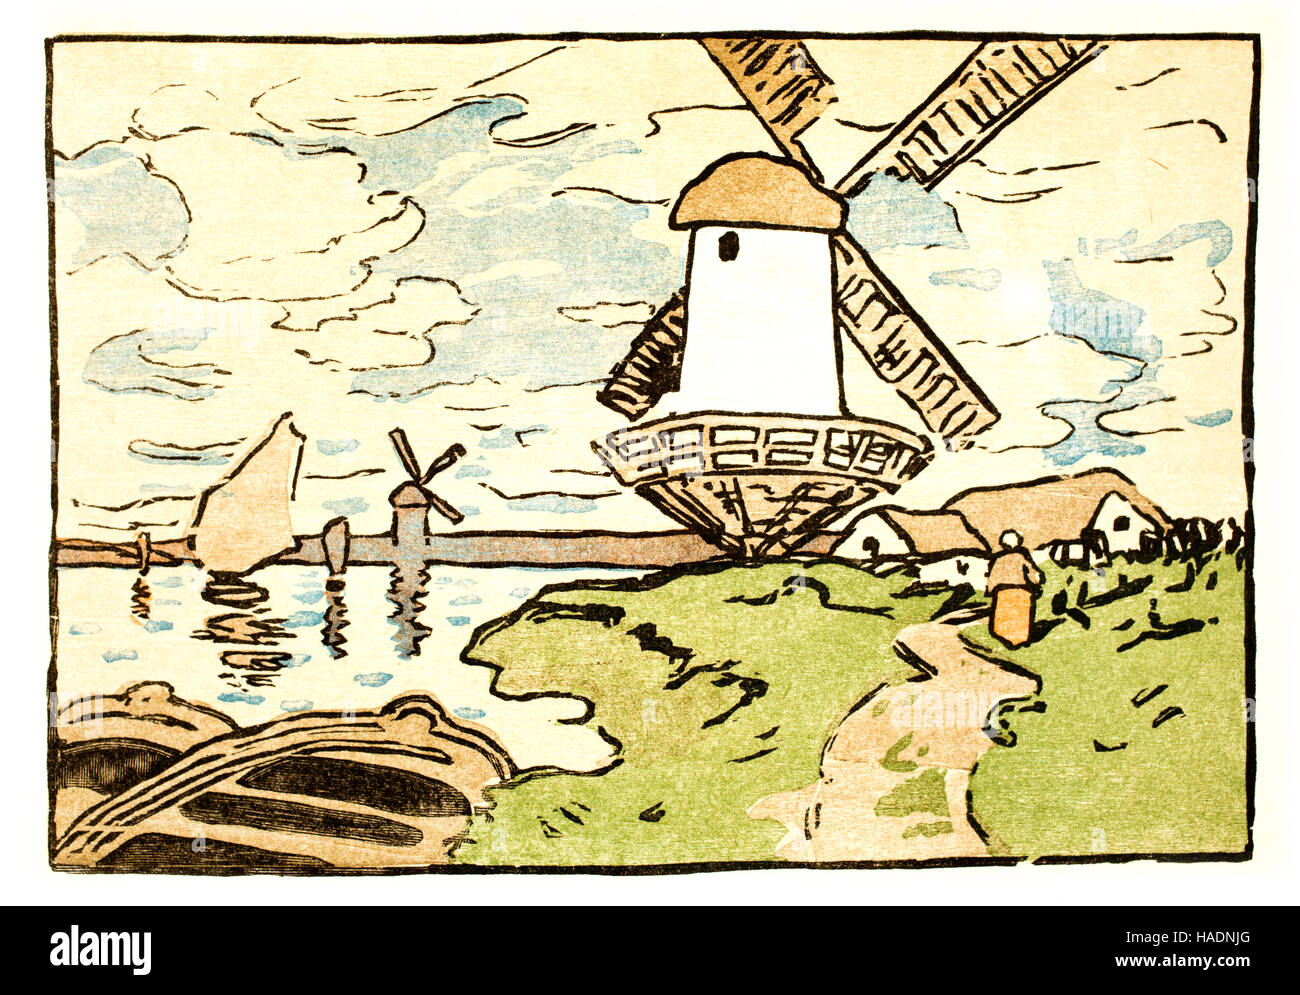 The windmill colour halftone illustration by from original wood engraving by EC Austen Brown from 1913 Studio Magazine Stock Photo